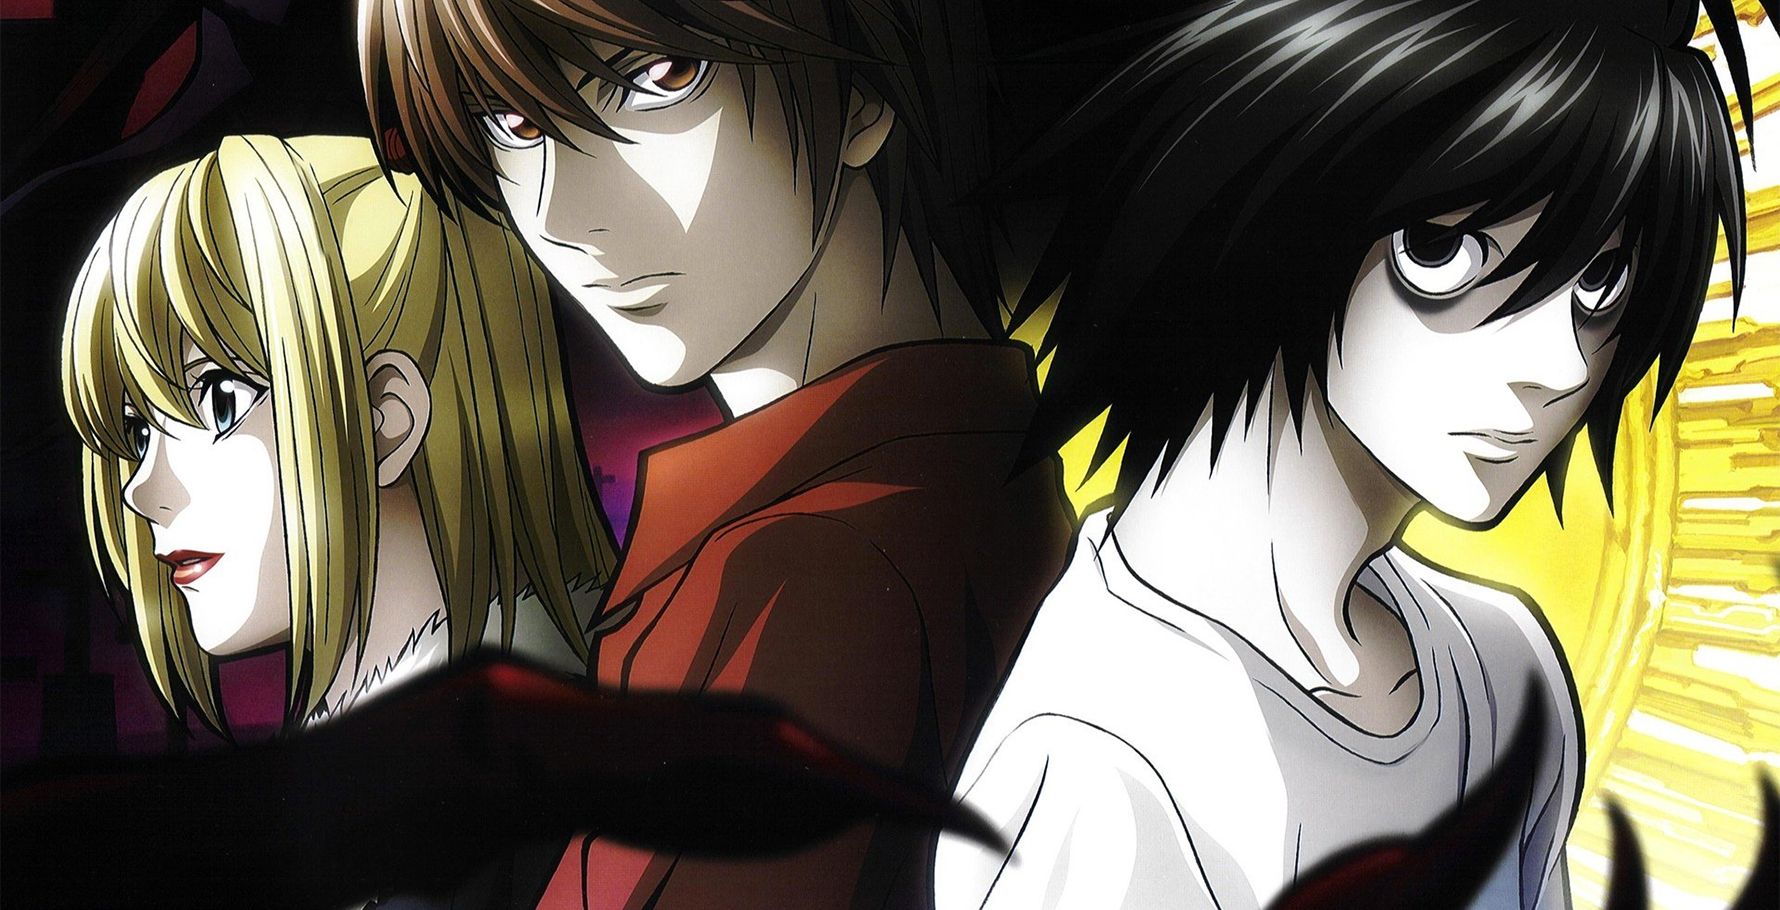 The MBTI® Types of Death Note Characters